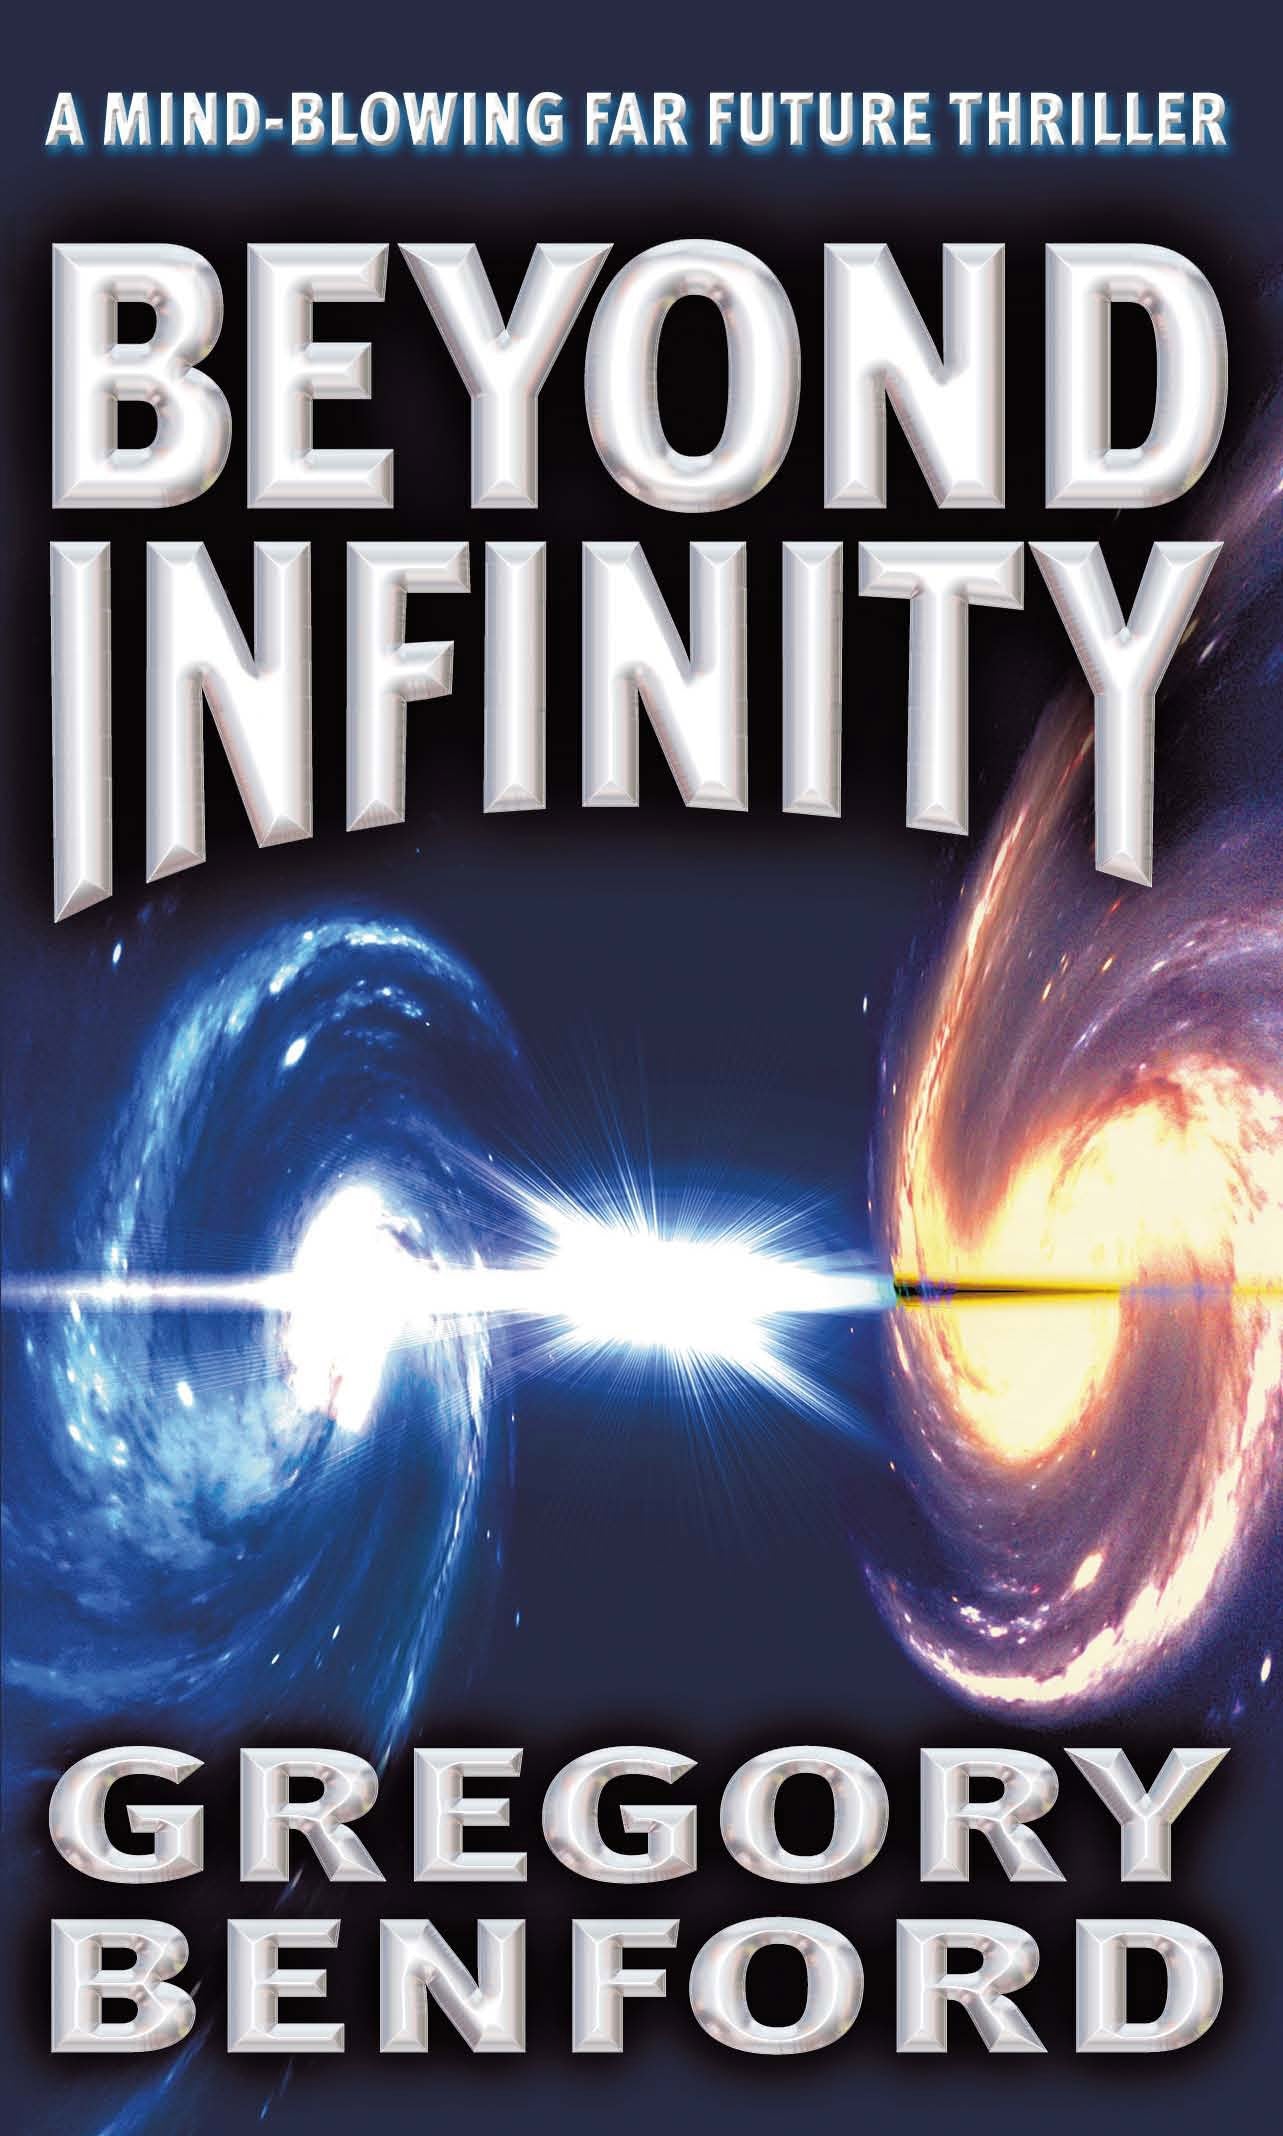 Beyond Infinity by Gregory Benford